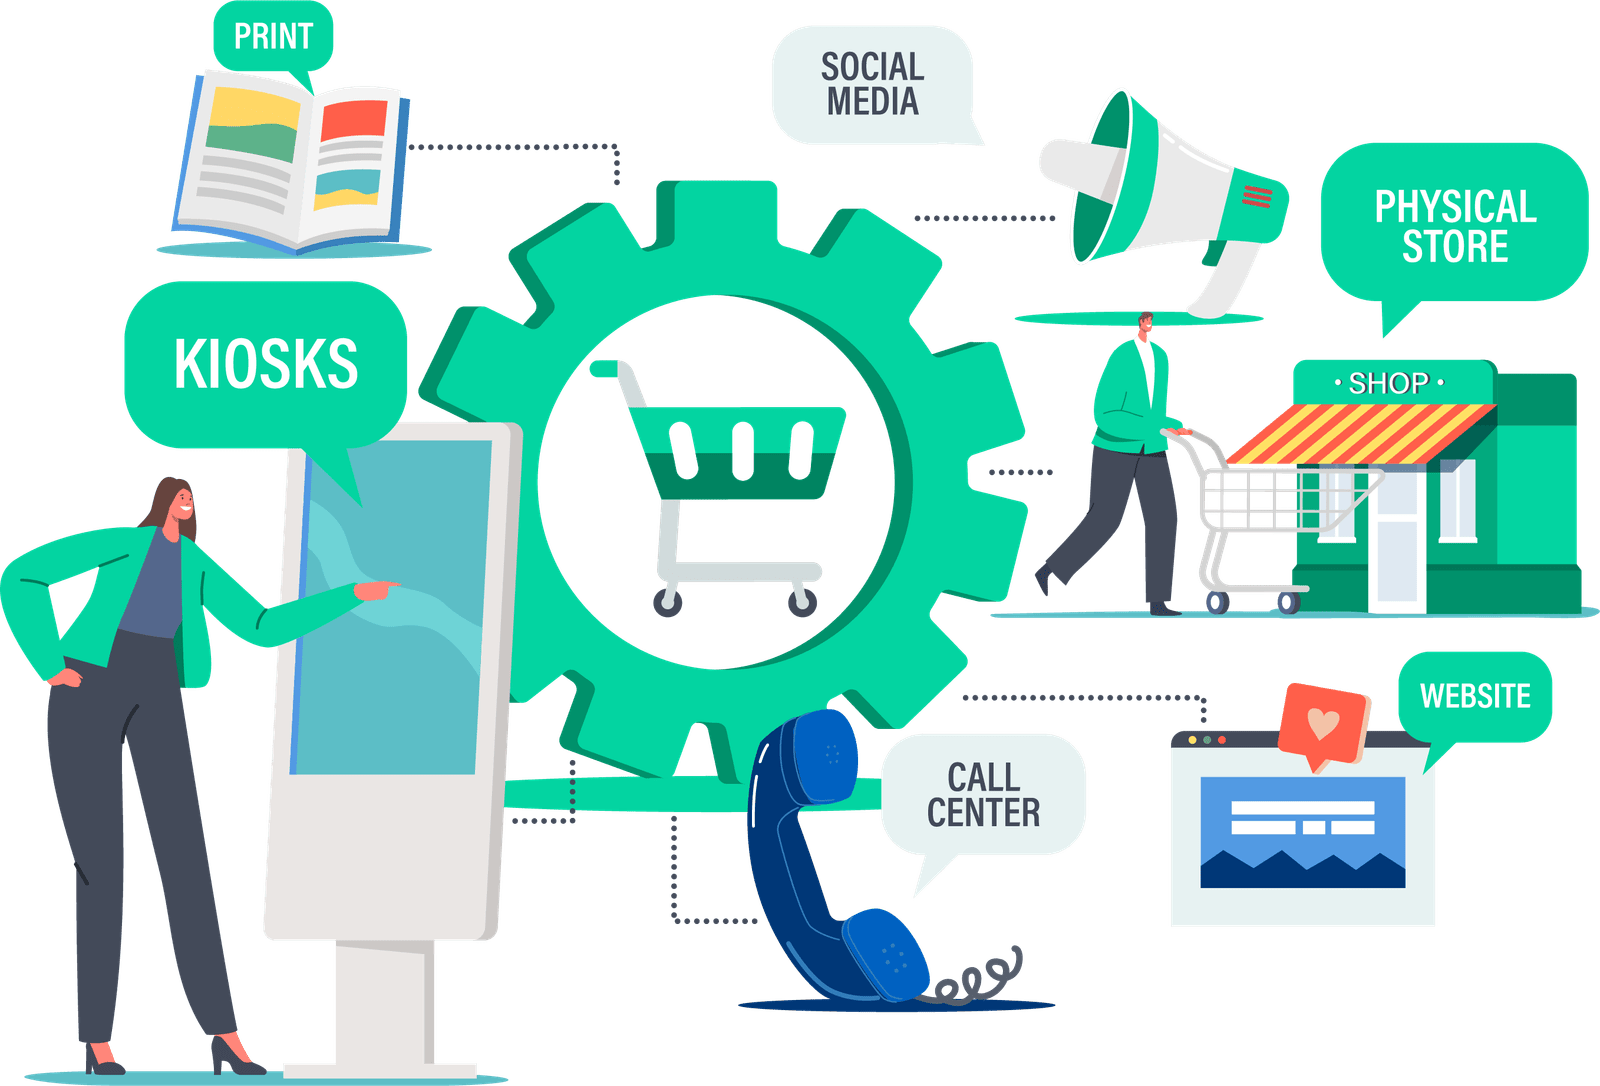 BEST PRACTICES FOR E-COMMERCE BUSINESSES